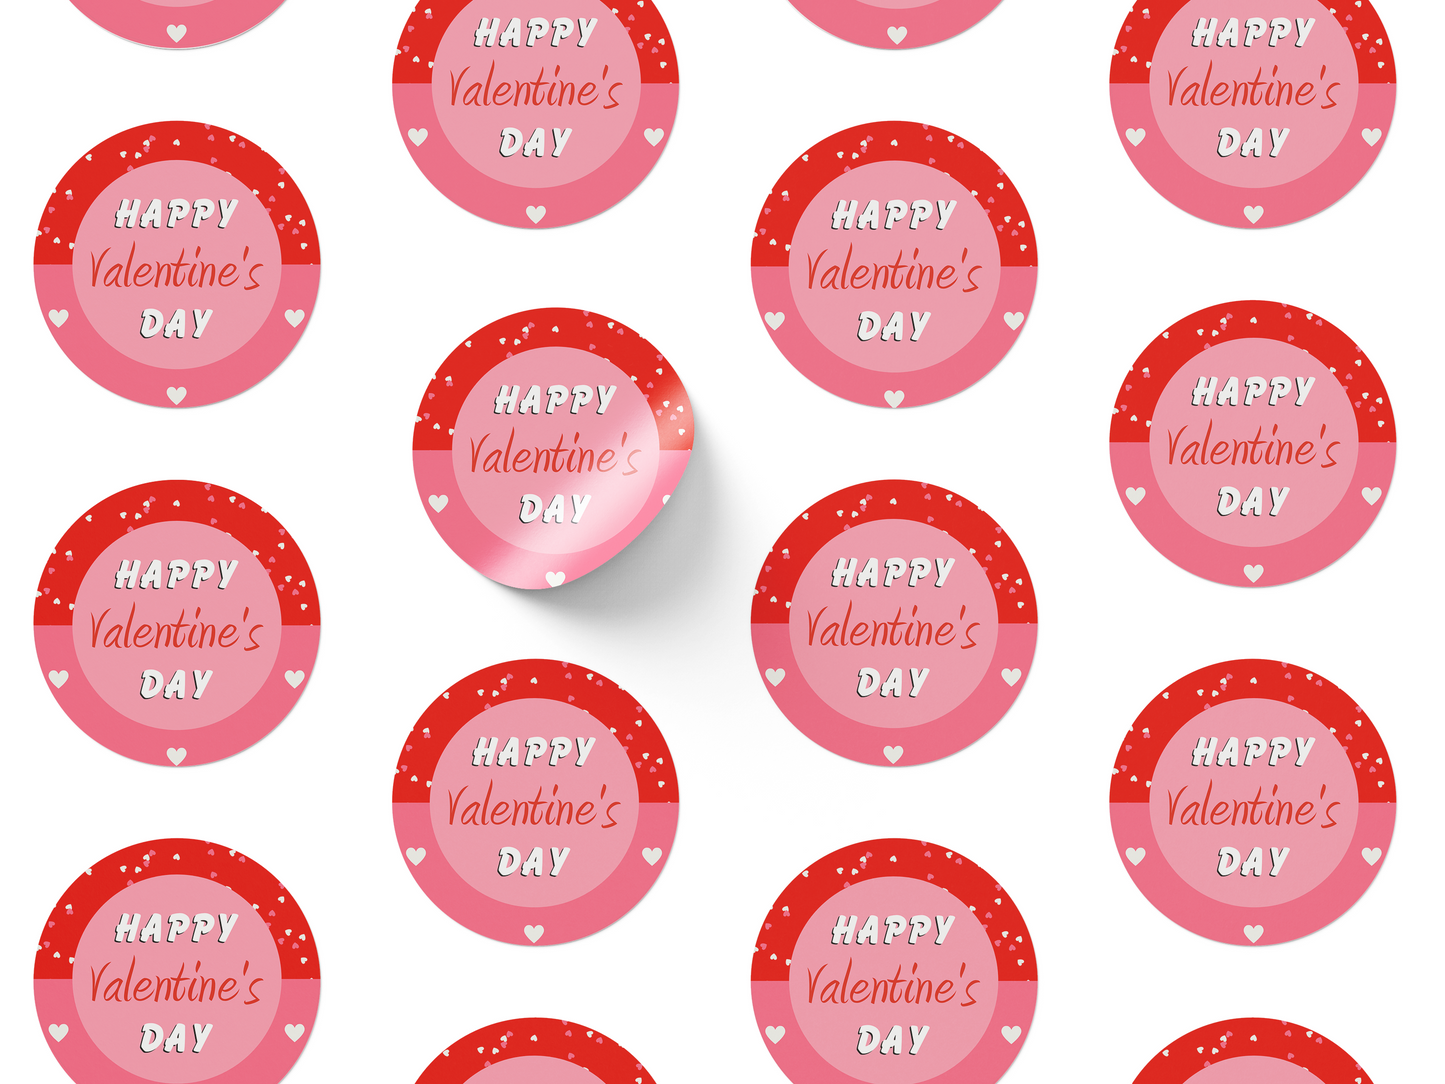 Happy Valentines Day stickers with a pink and red loveheart design